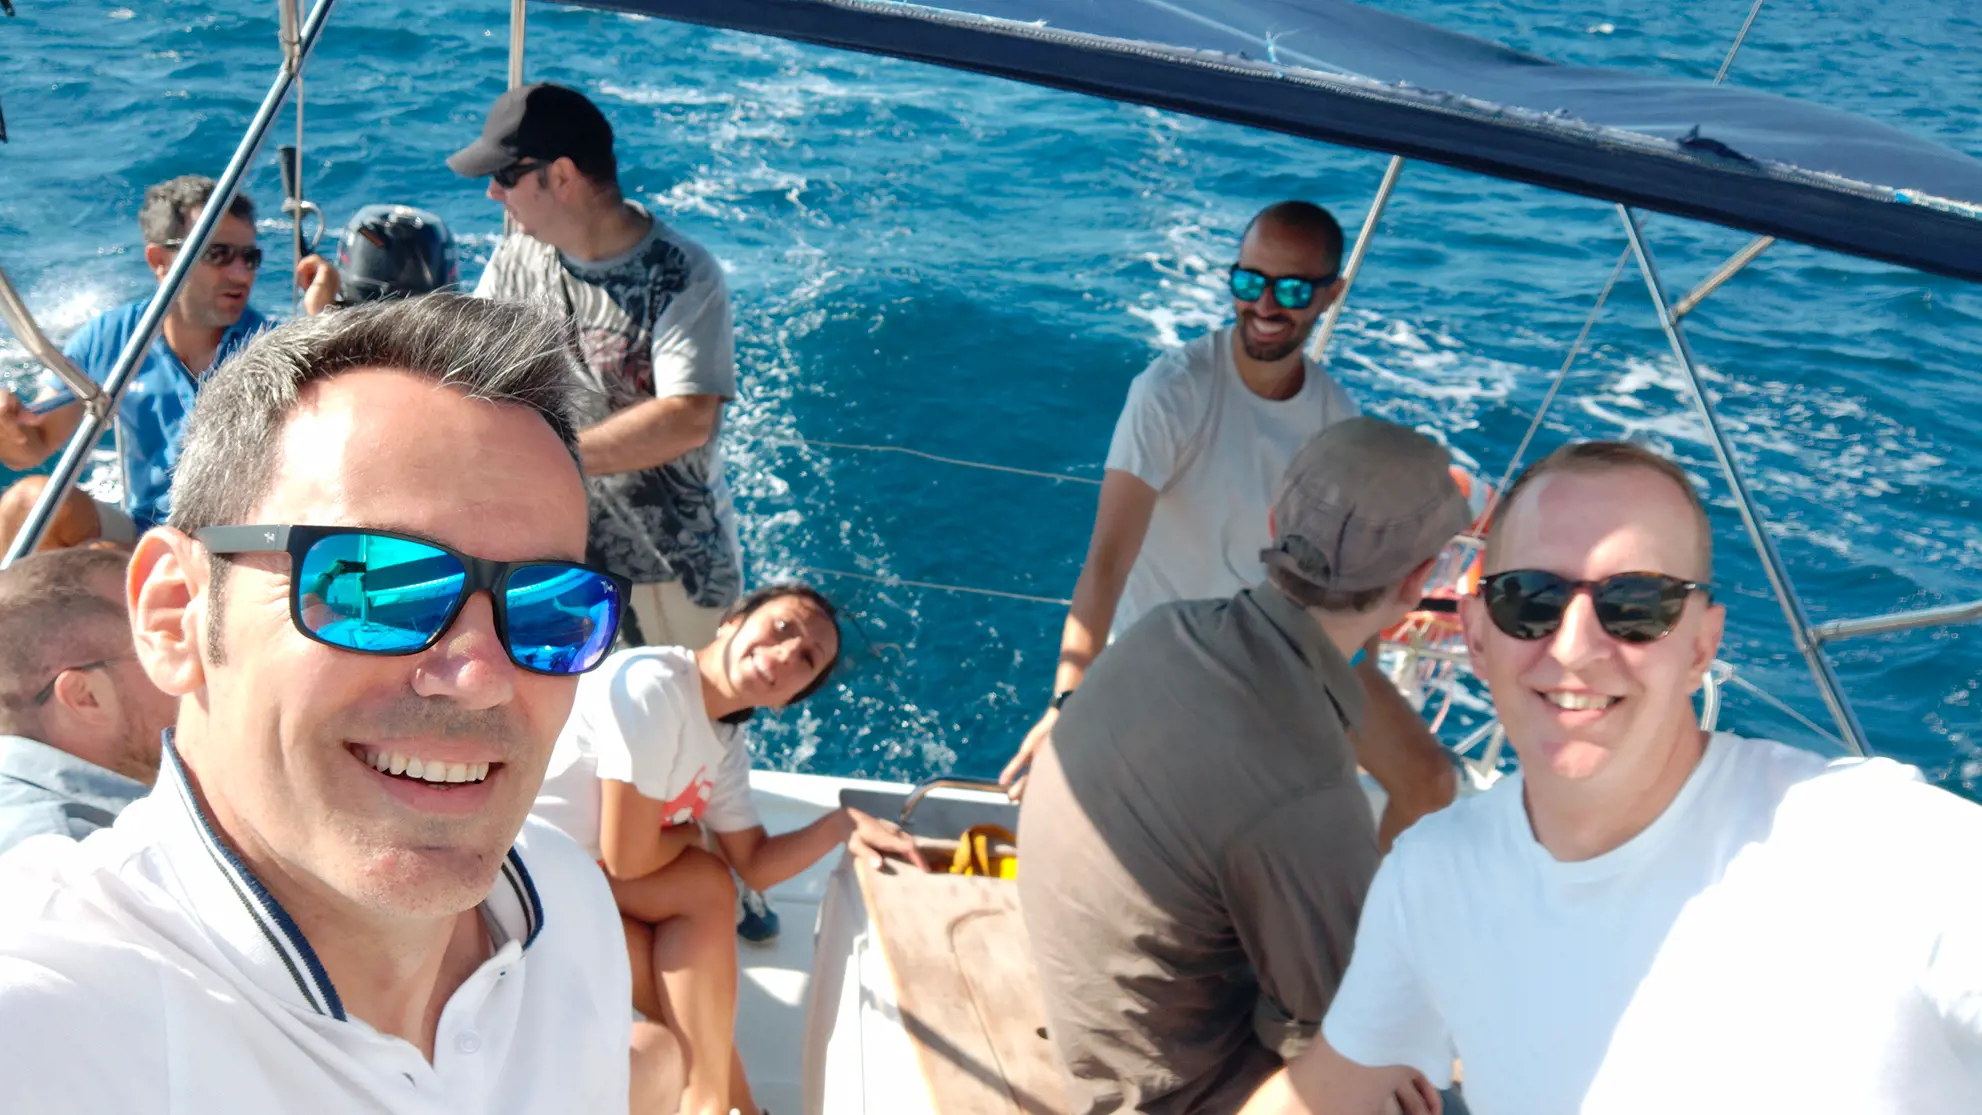 isolutions crew group selfie on the sea during the regatta